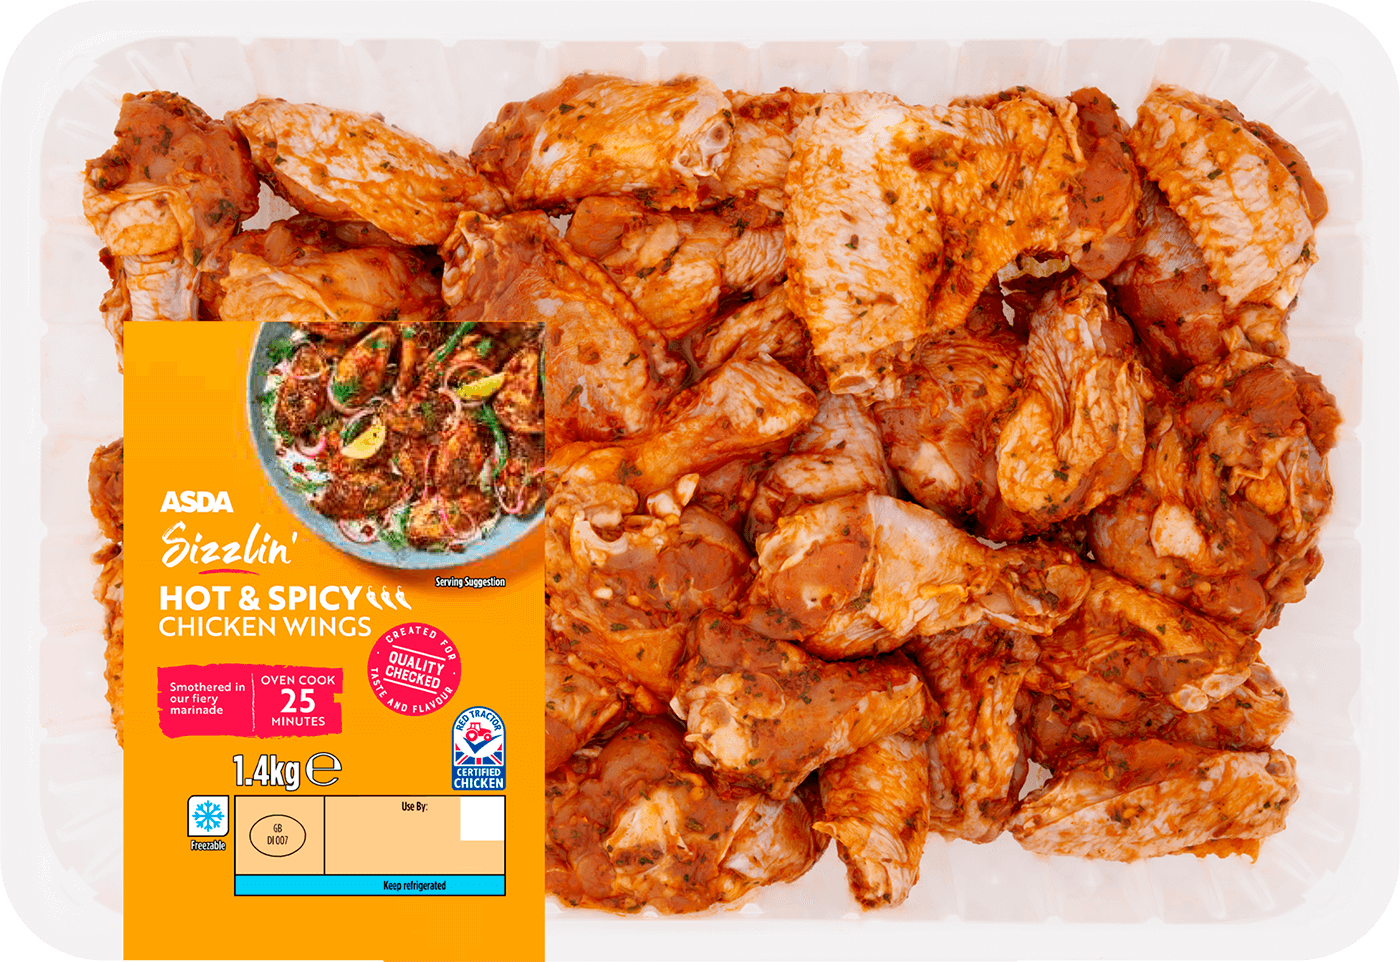 Image of Sizzlin' Hot&Spicy chicken wings package